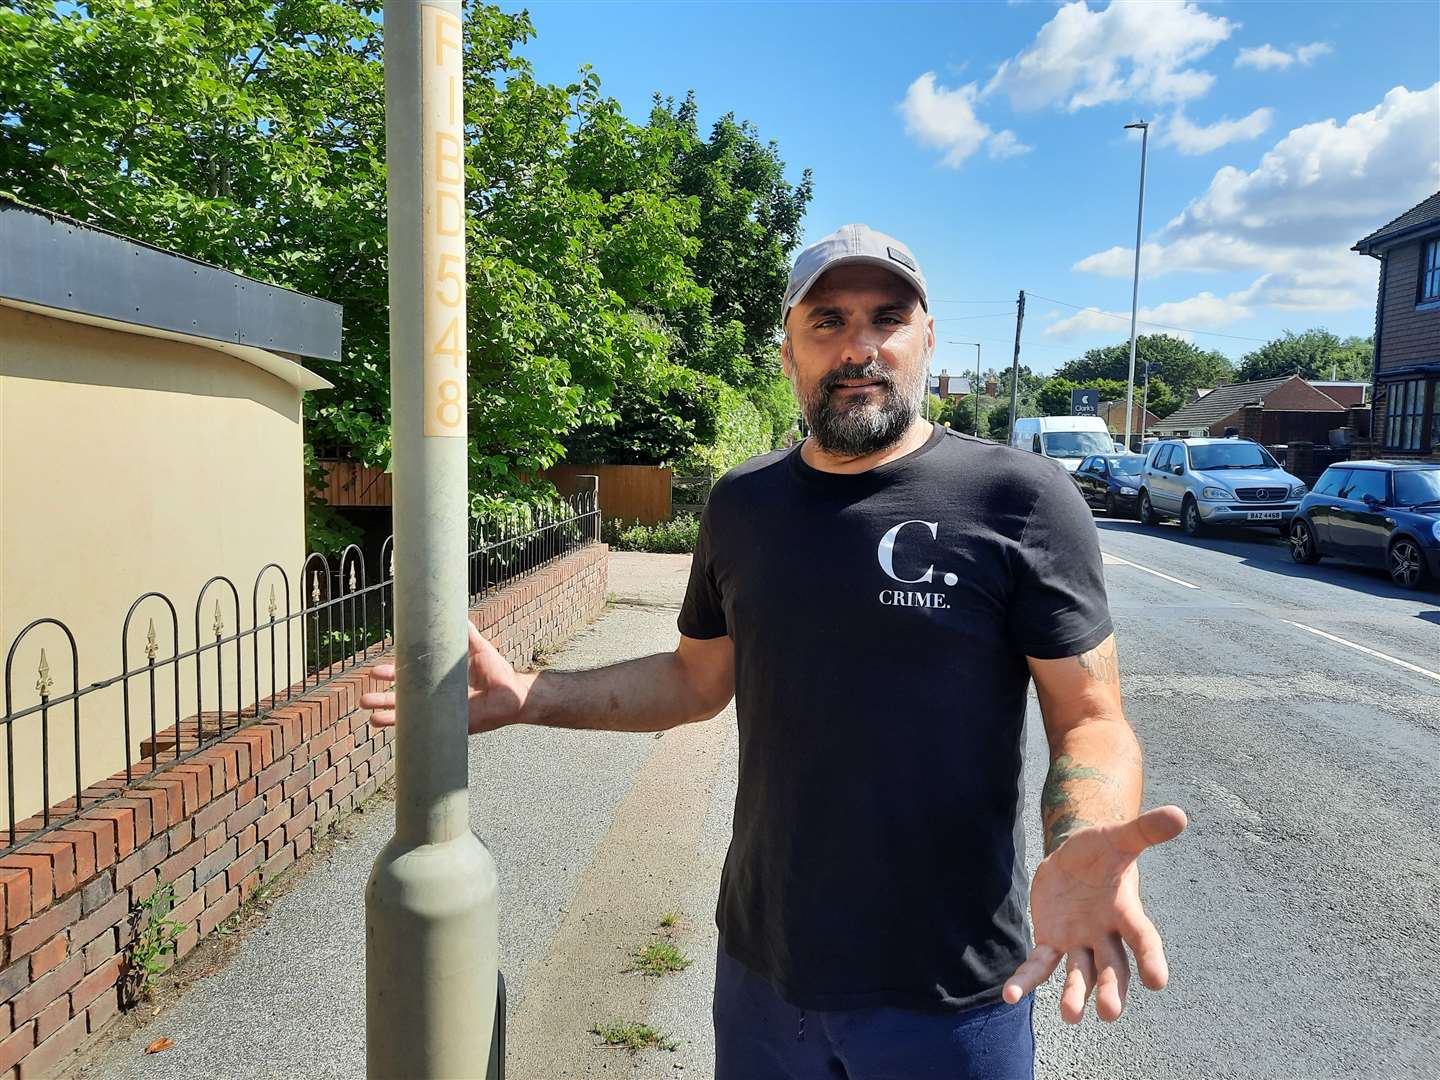 Royal Oak landlord Simon Kidd stood next to where the mirror was positioned